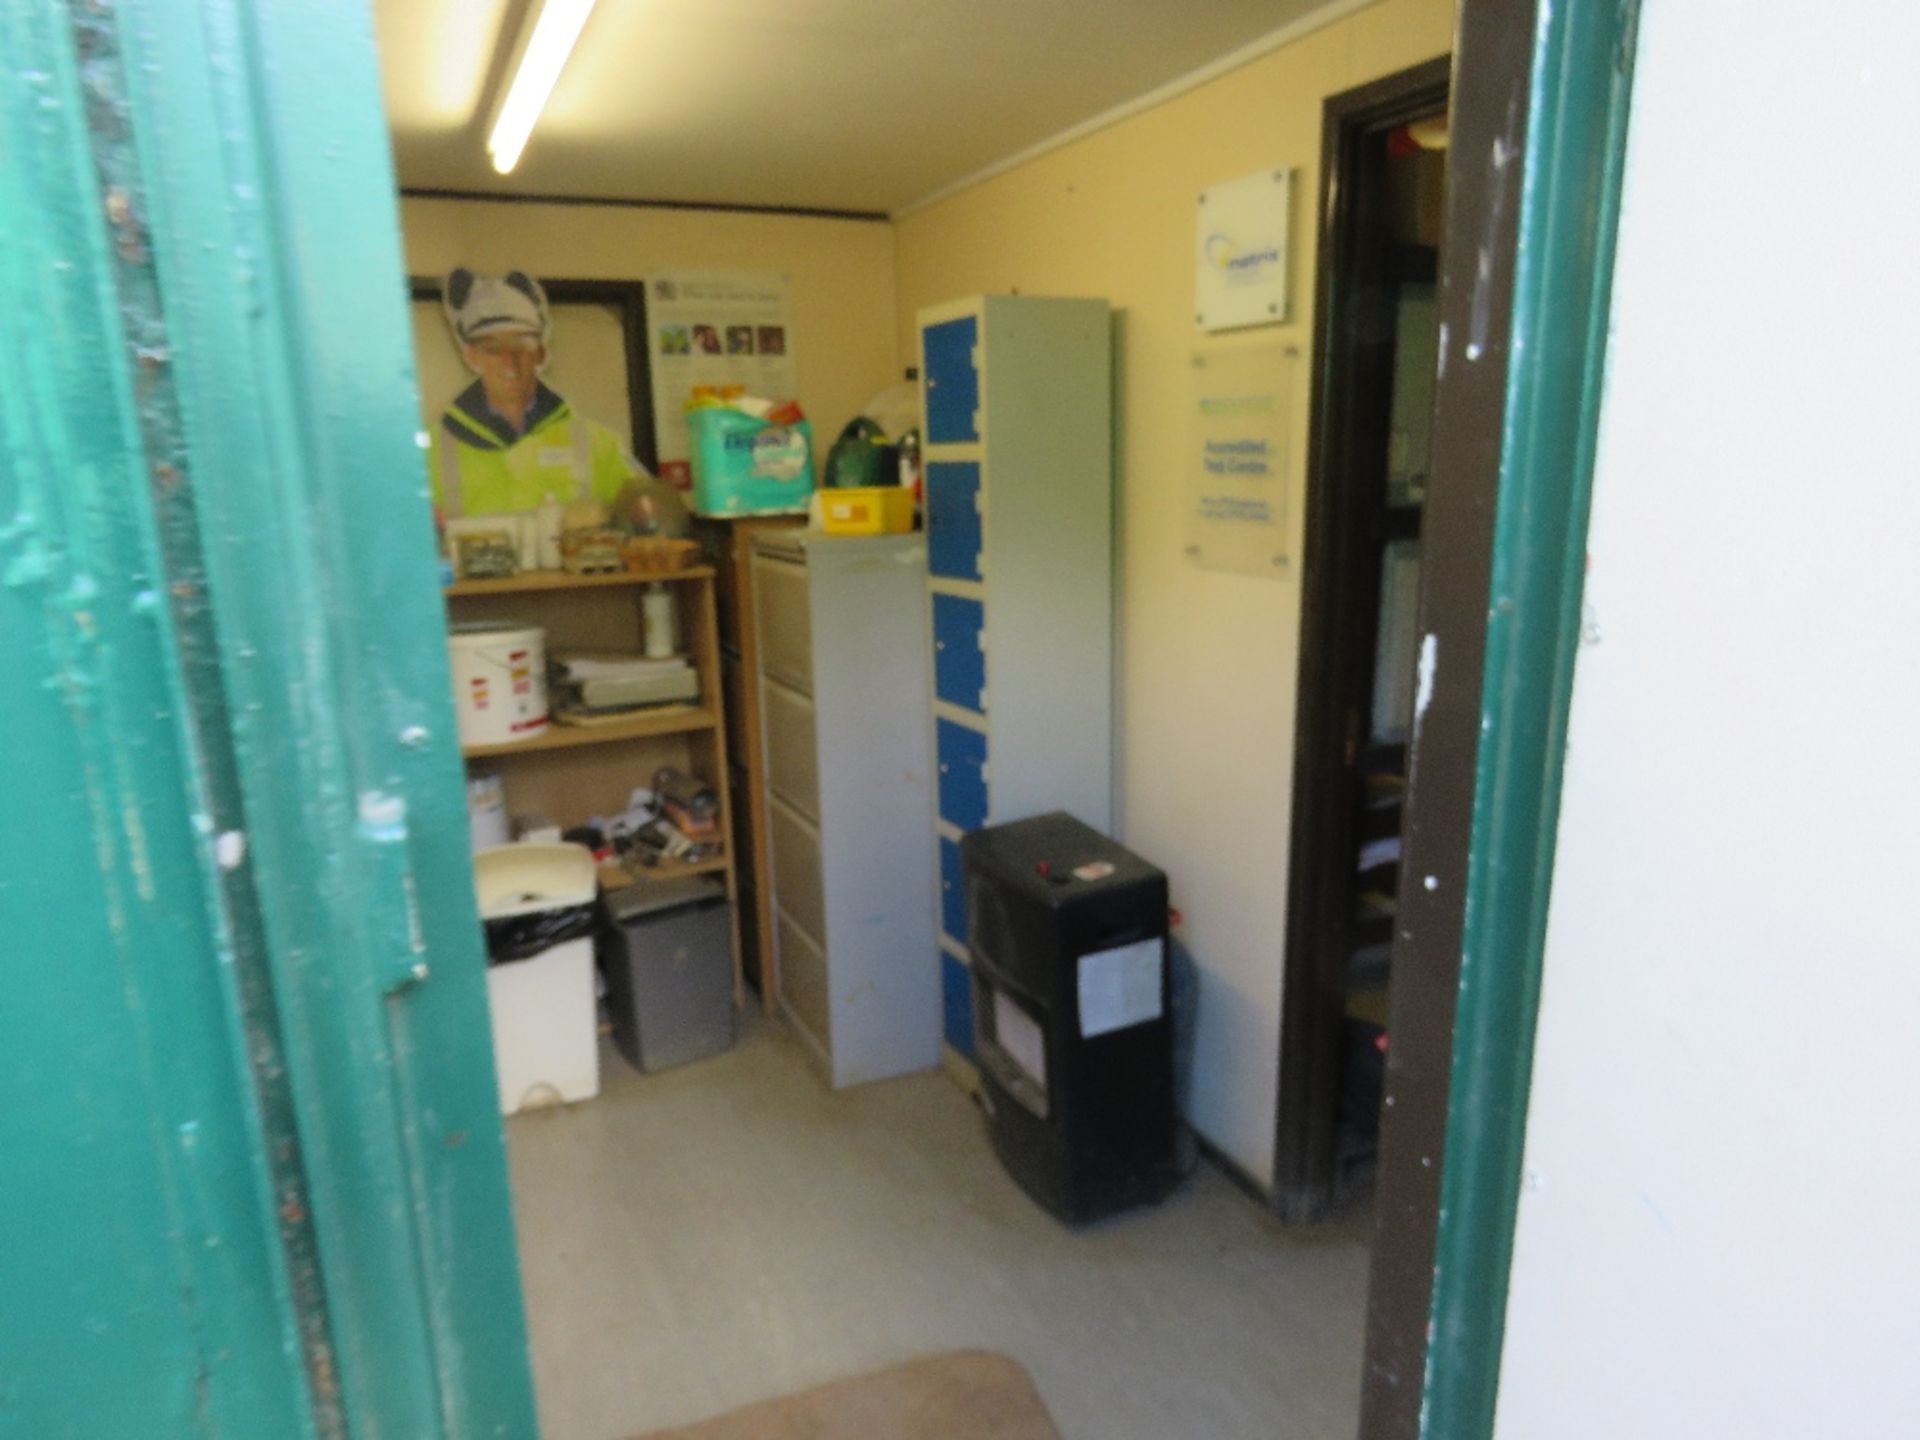 PORTABLE SITE OFFICE 32FT X 10FT APPROX WITH SMALL KITCHEN AREA AT ONE END. 60/40 SPLIT APPROX AS SH - Image 4 of 8